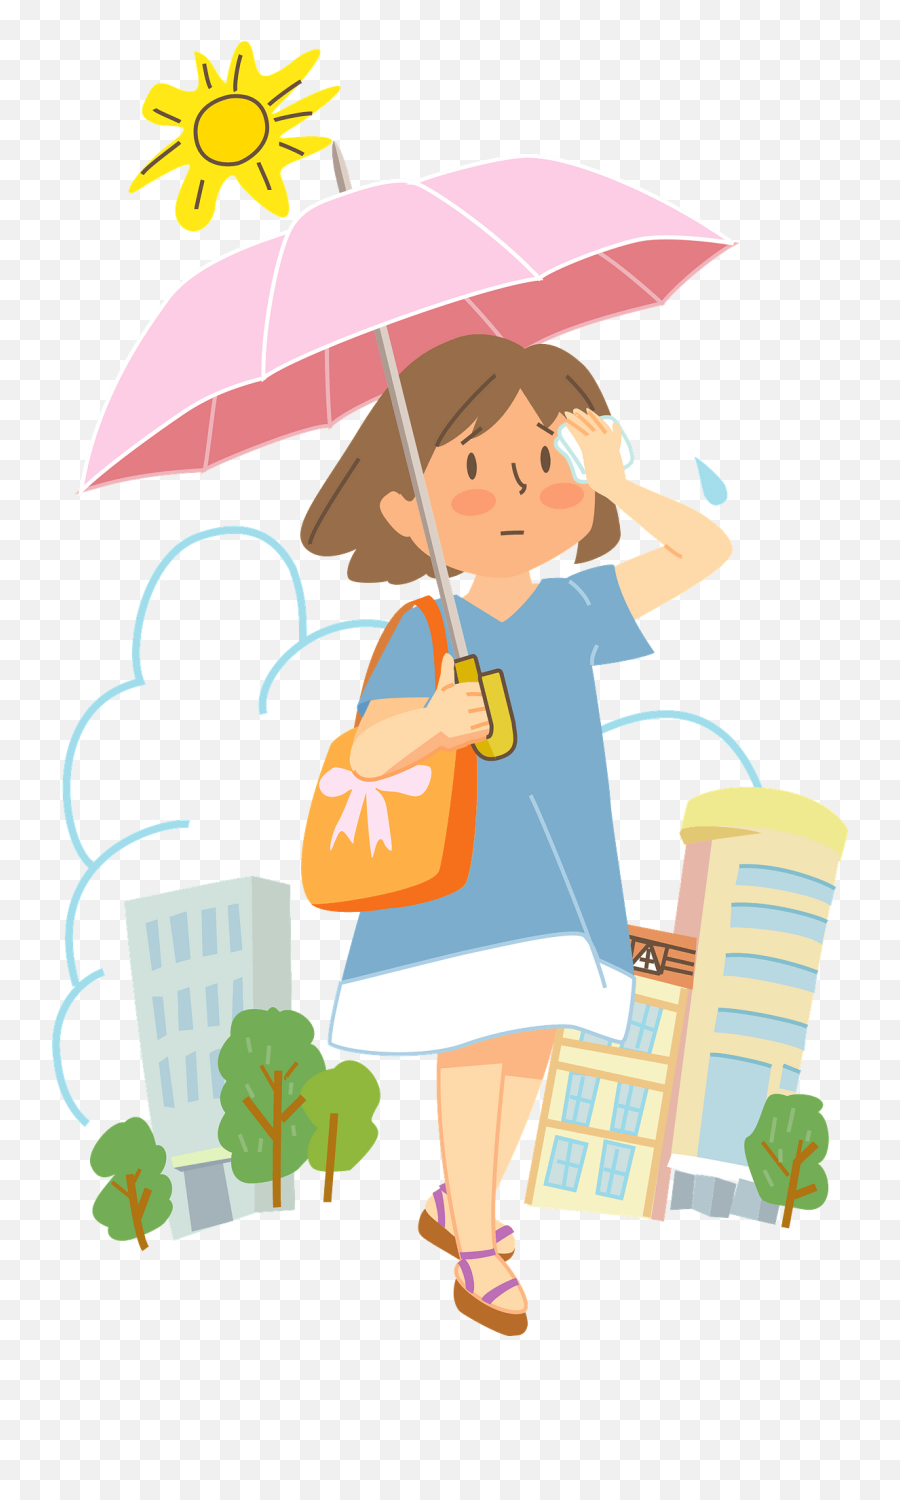 Woman Is Hot In The Summer Clipart - Girl With Umbrella Clipart Heat Emoji,Summer Clipart